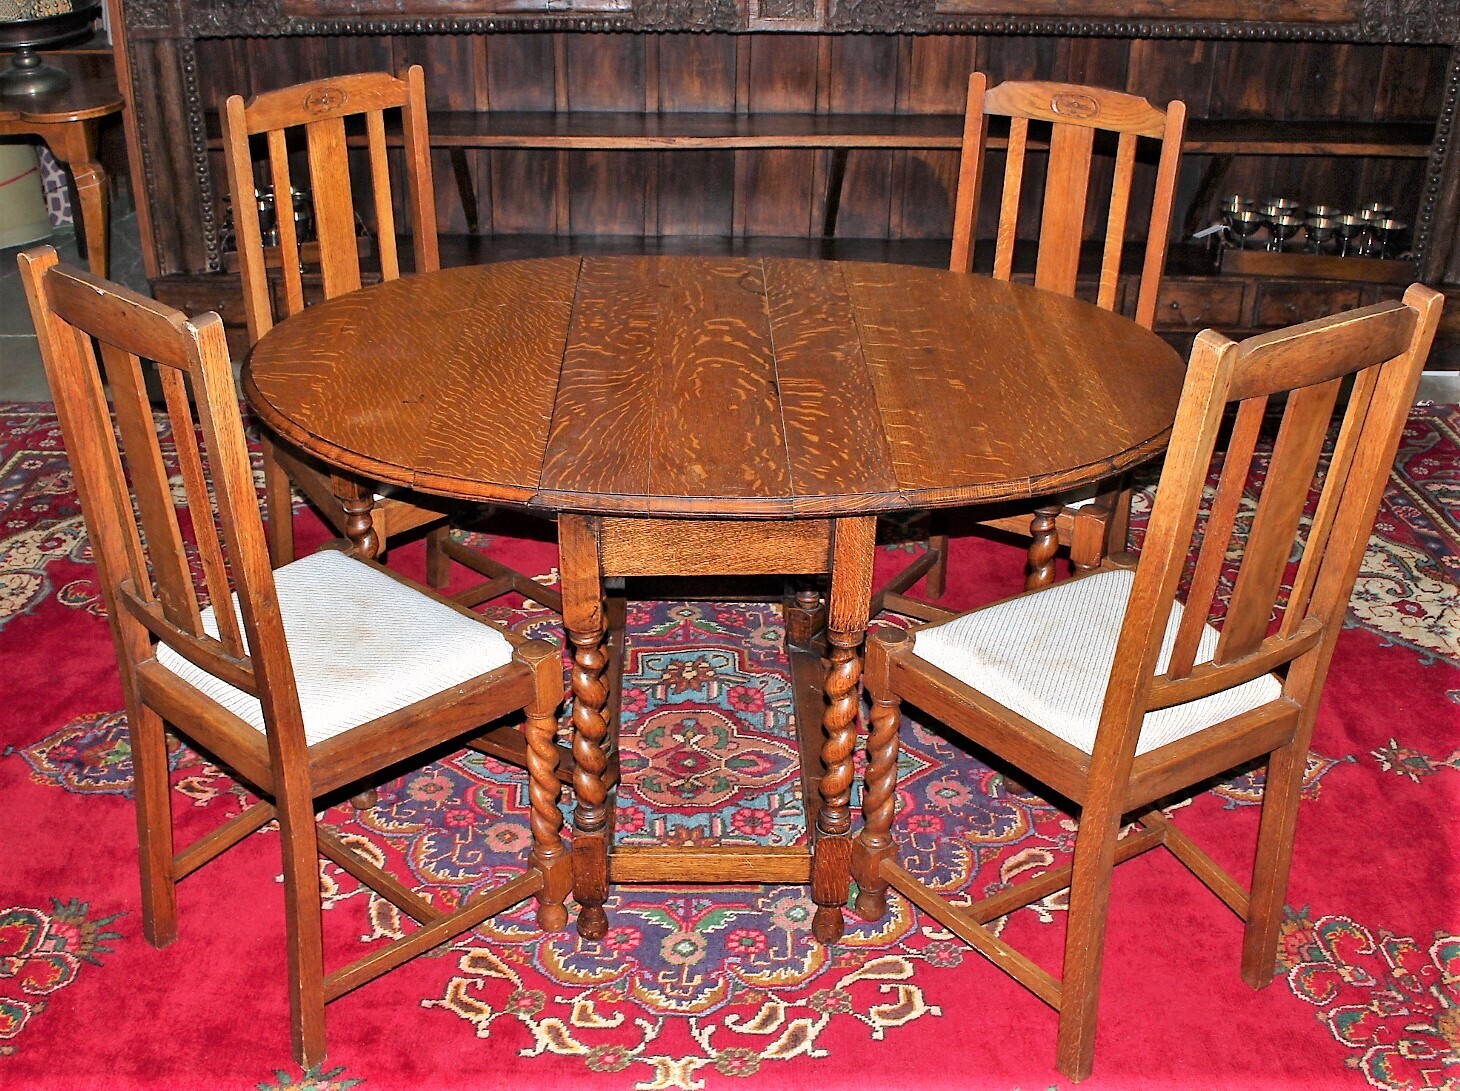 Antique English Barley Twist Solid Oak Wood Drop Leaf Table with Four Chairs